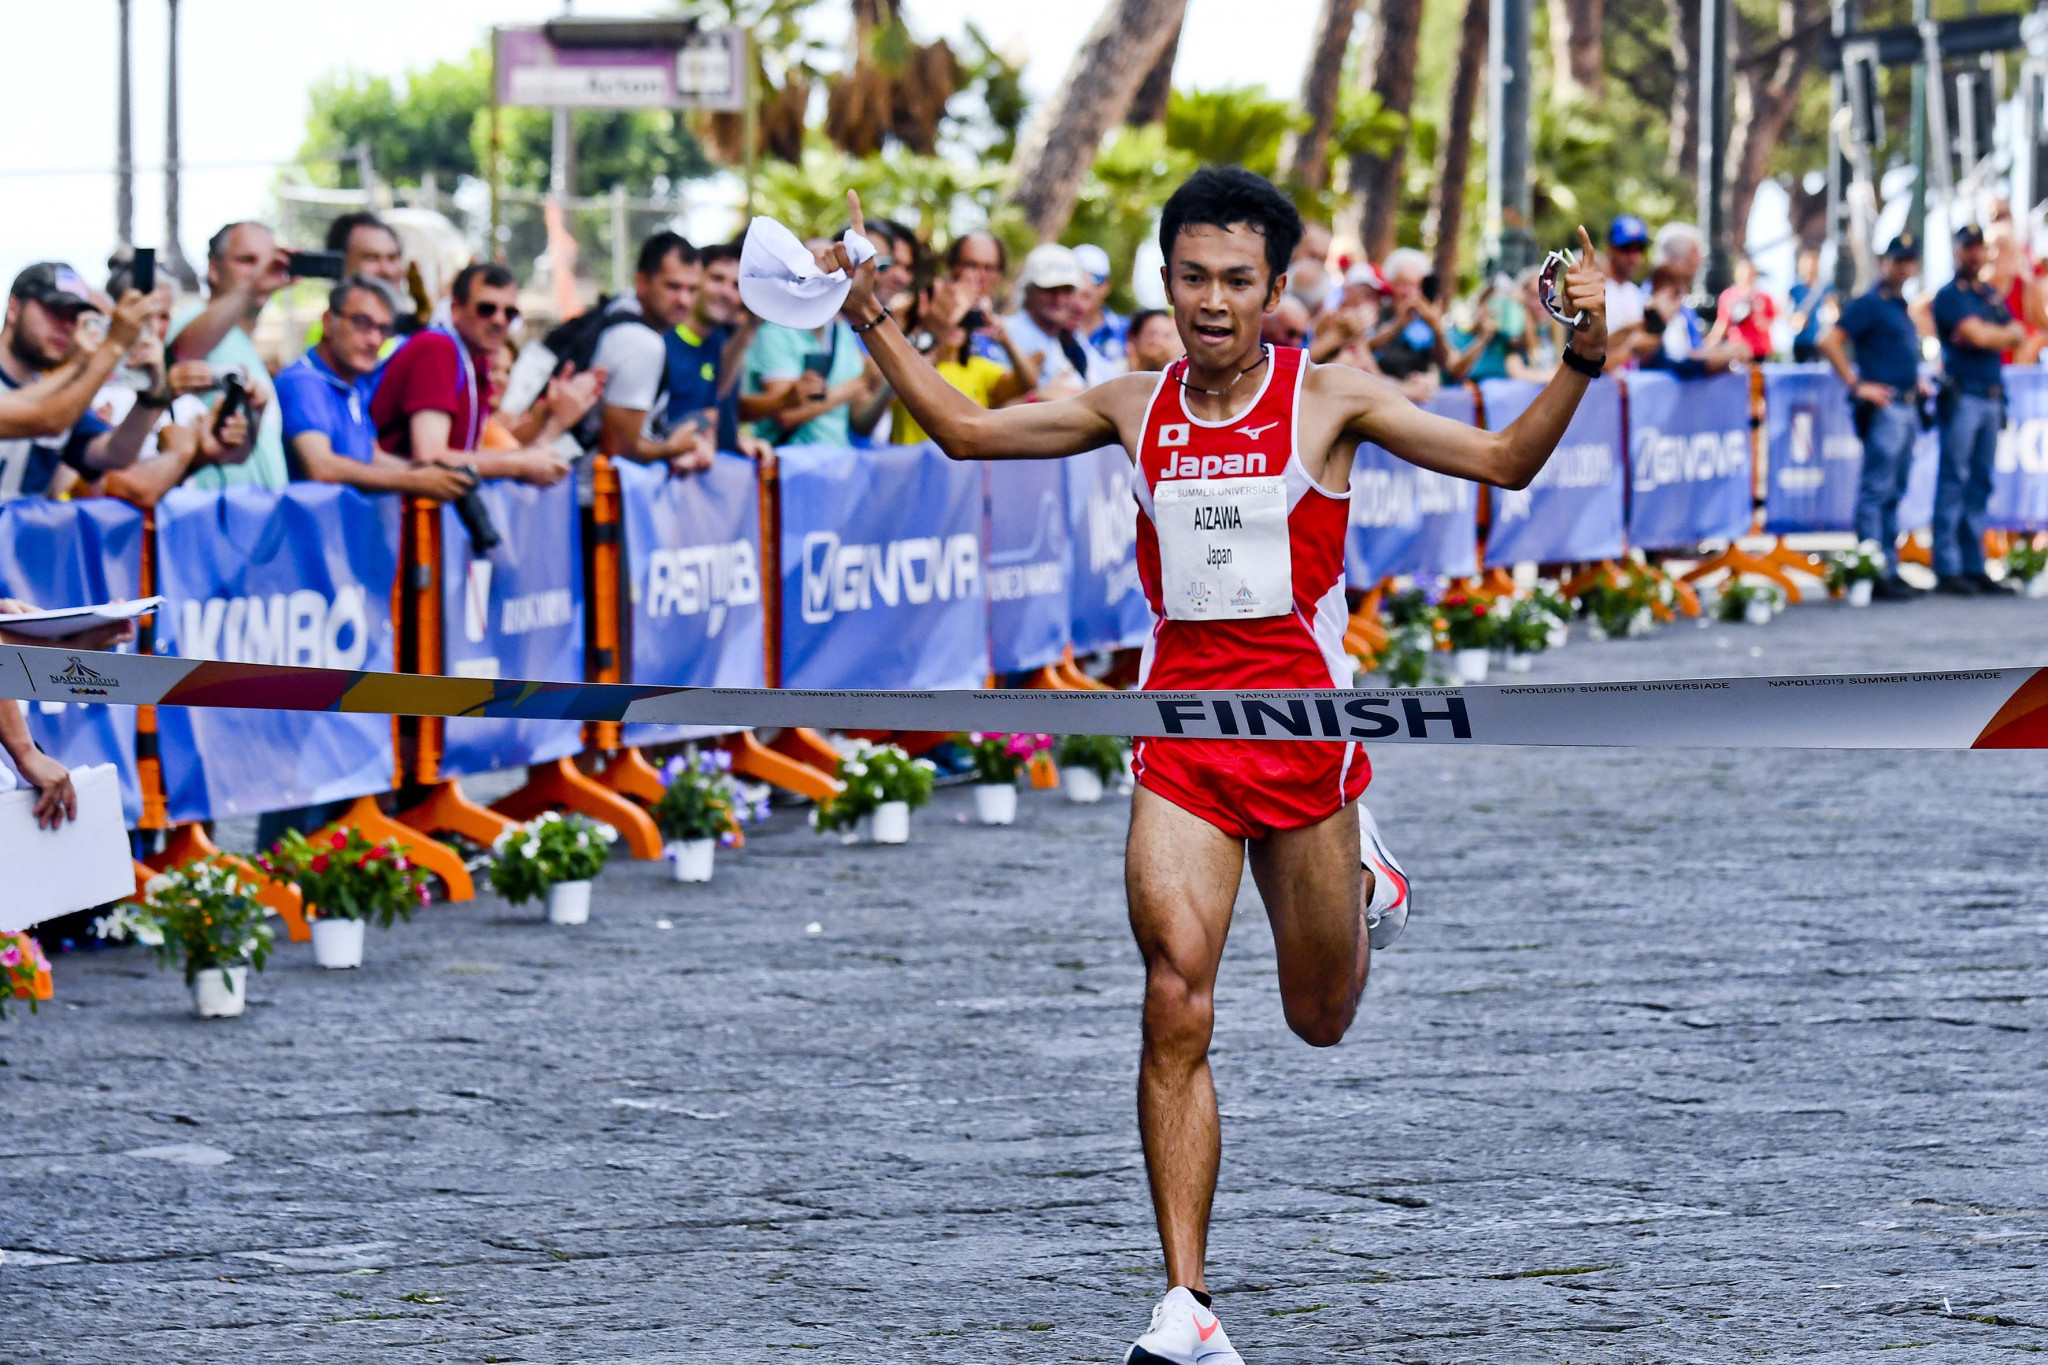 Japan have now claimed all six medals in the Naples 2019 half-marathon, with Akira Aizawa the winning in the men's race in an event where China's Bujie Duo lost his bronze medal after being disqualified ©Naples 2019